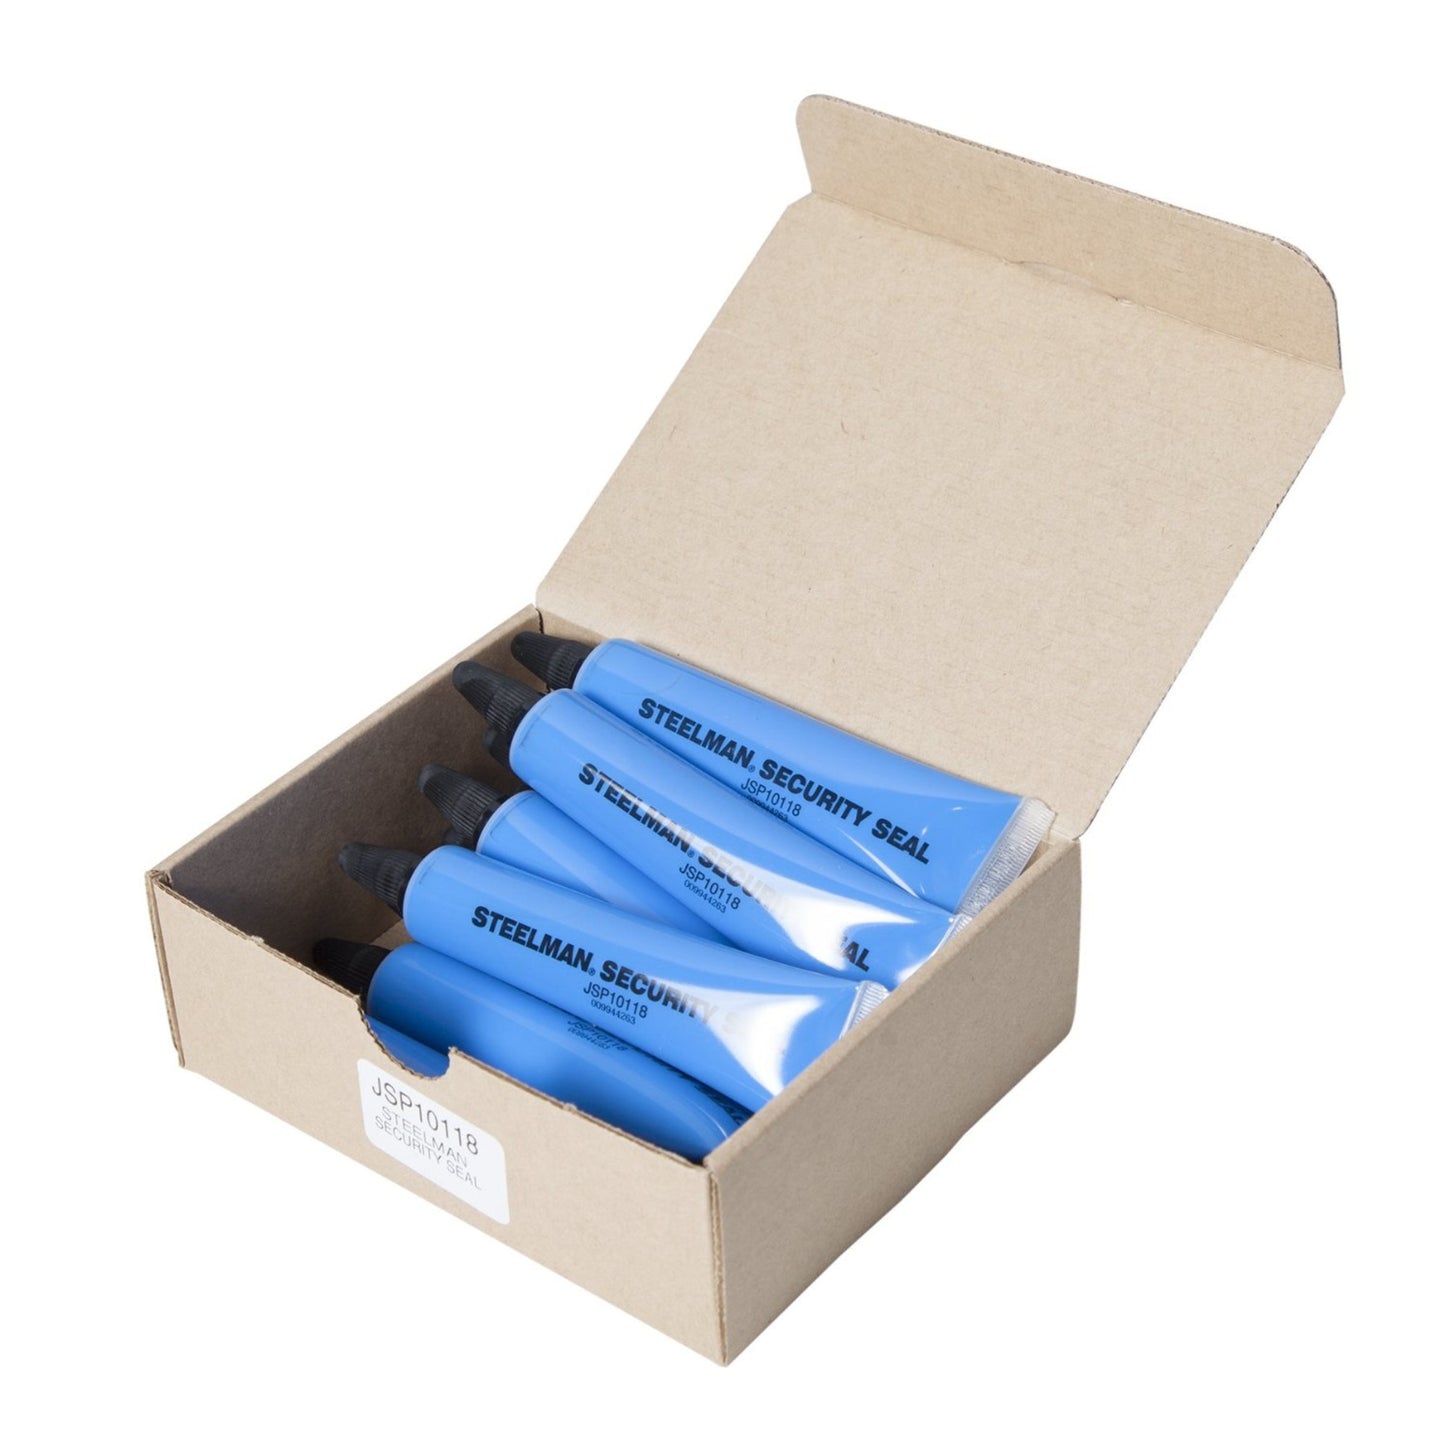 STEELMAN Security Seal (blue) in a pack of 10 1-ounce tubes. Mark a properly torqued fastener along the base or across the fastener head and onto the surrounding surface. A quick glance will confirm no tampering or loosening from vibration.